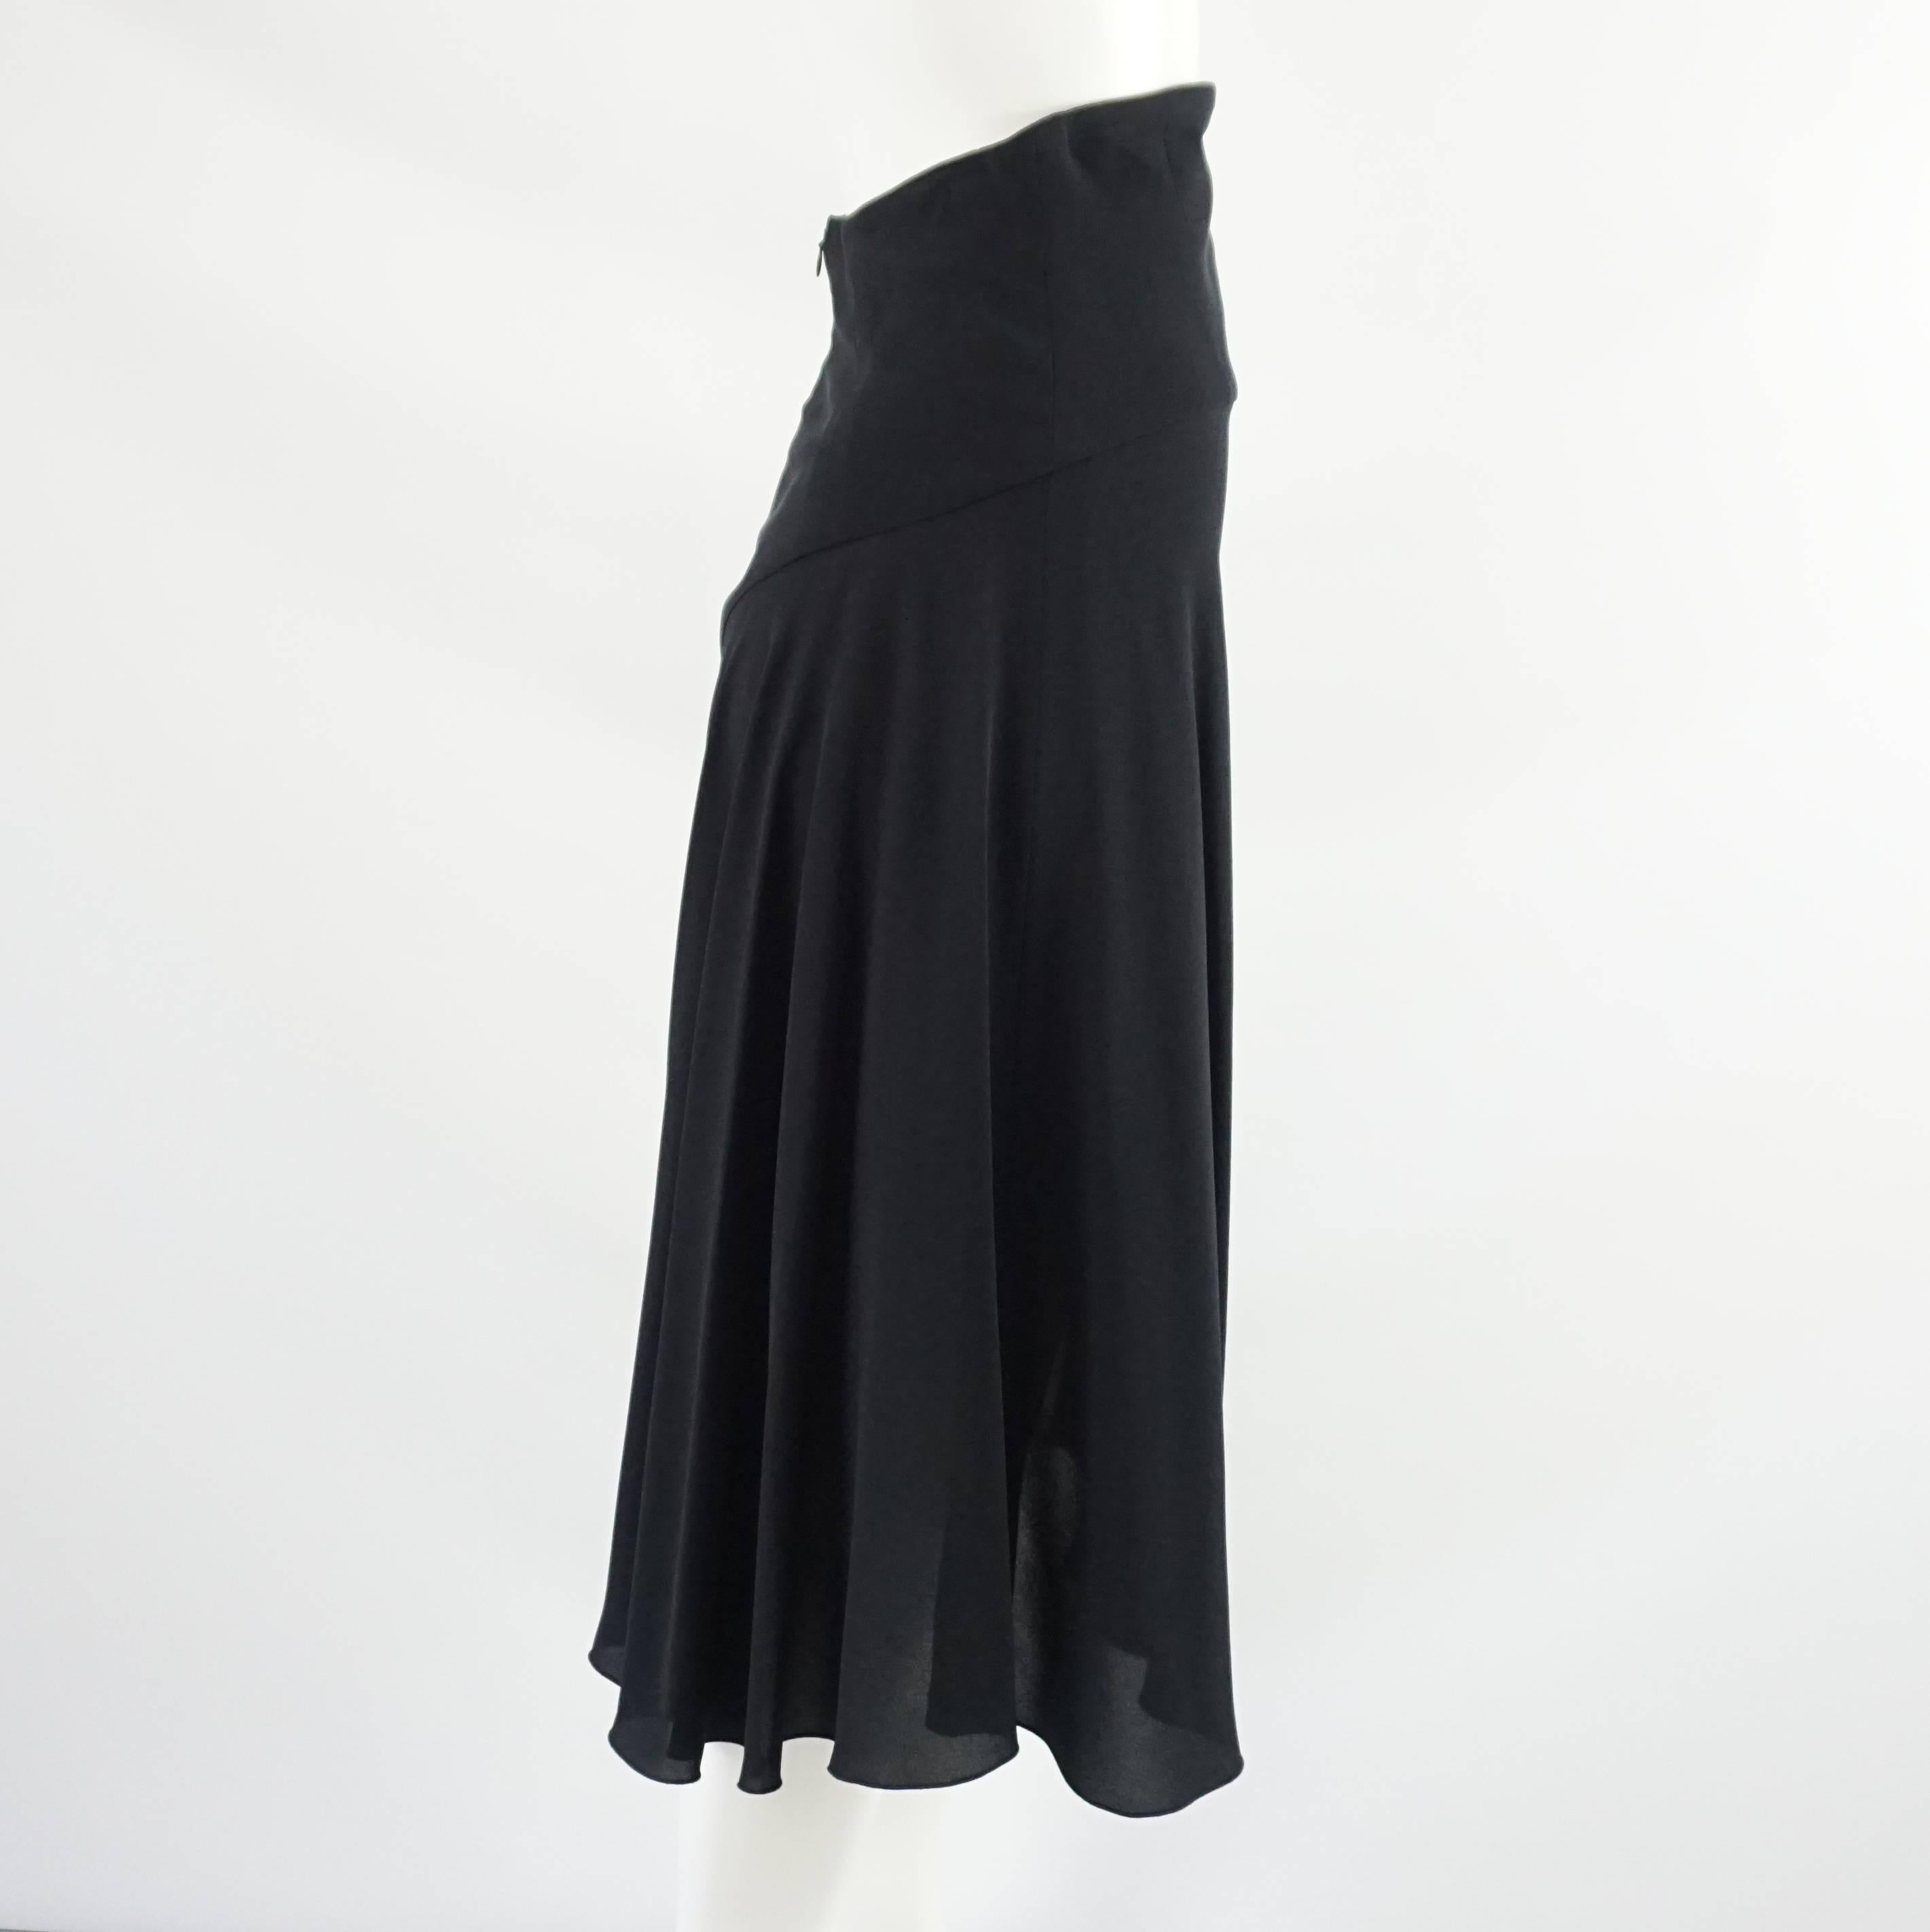 This Chanel skirt has a long and flowing design. It is black silk with a high waist and asymmetrical hem. The first 6